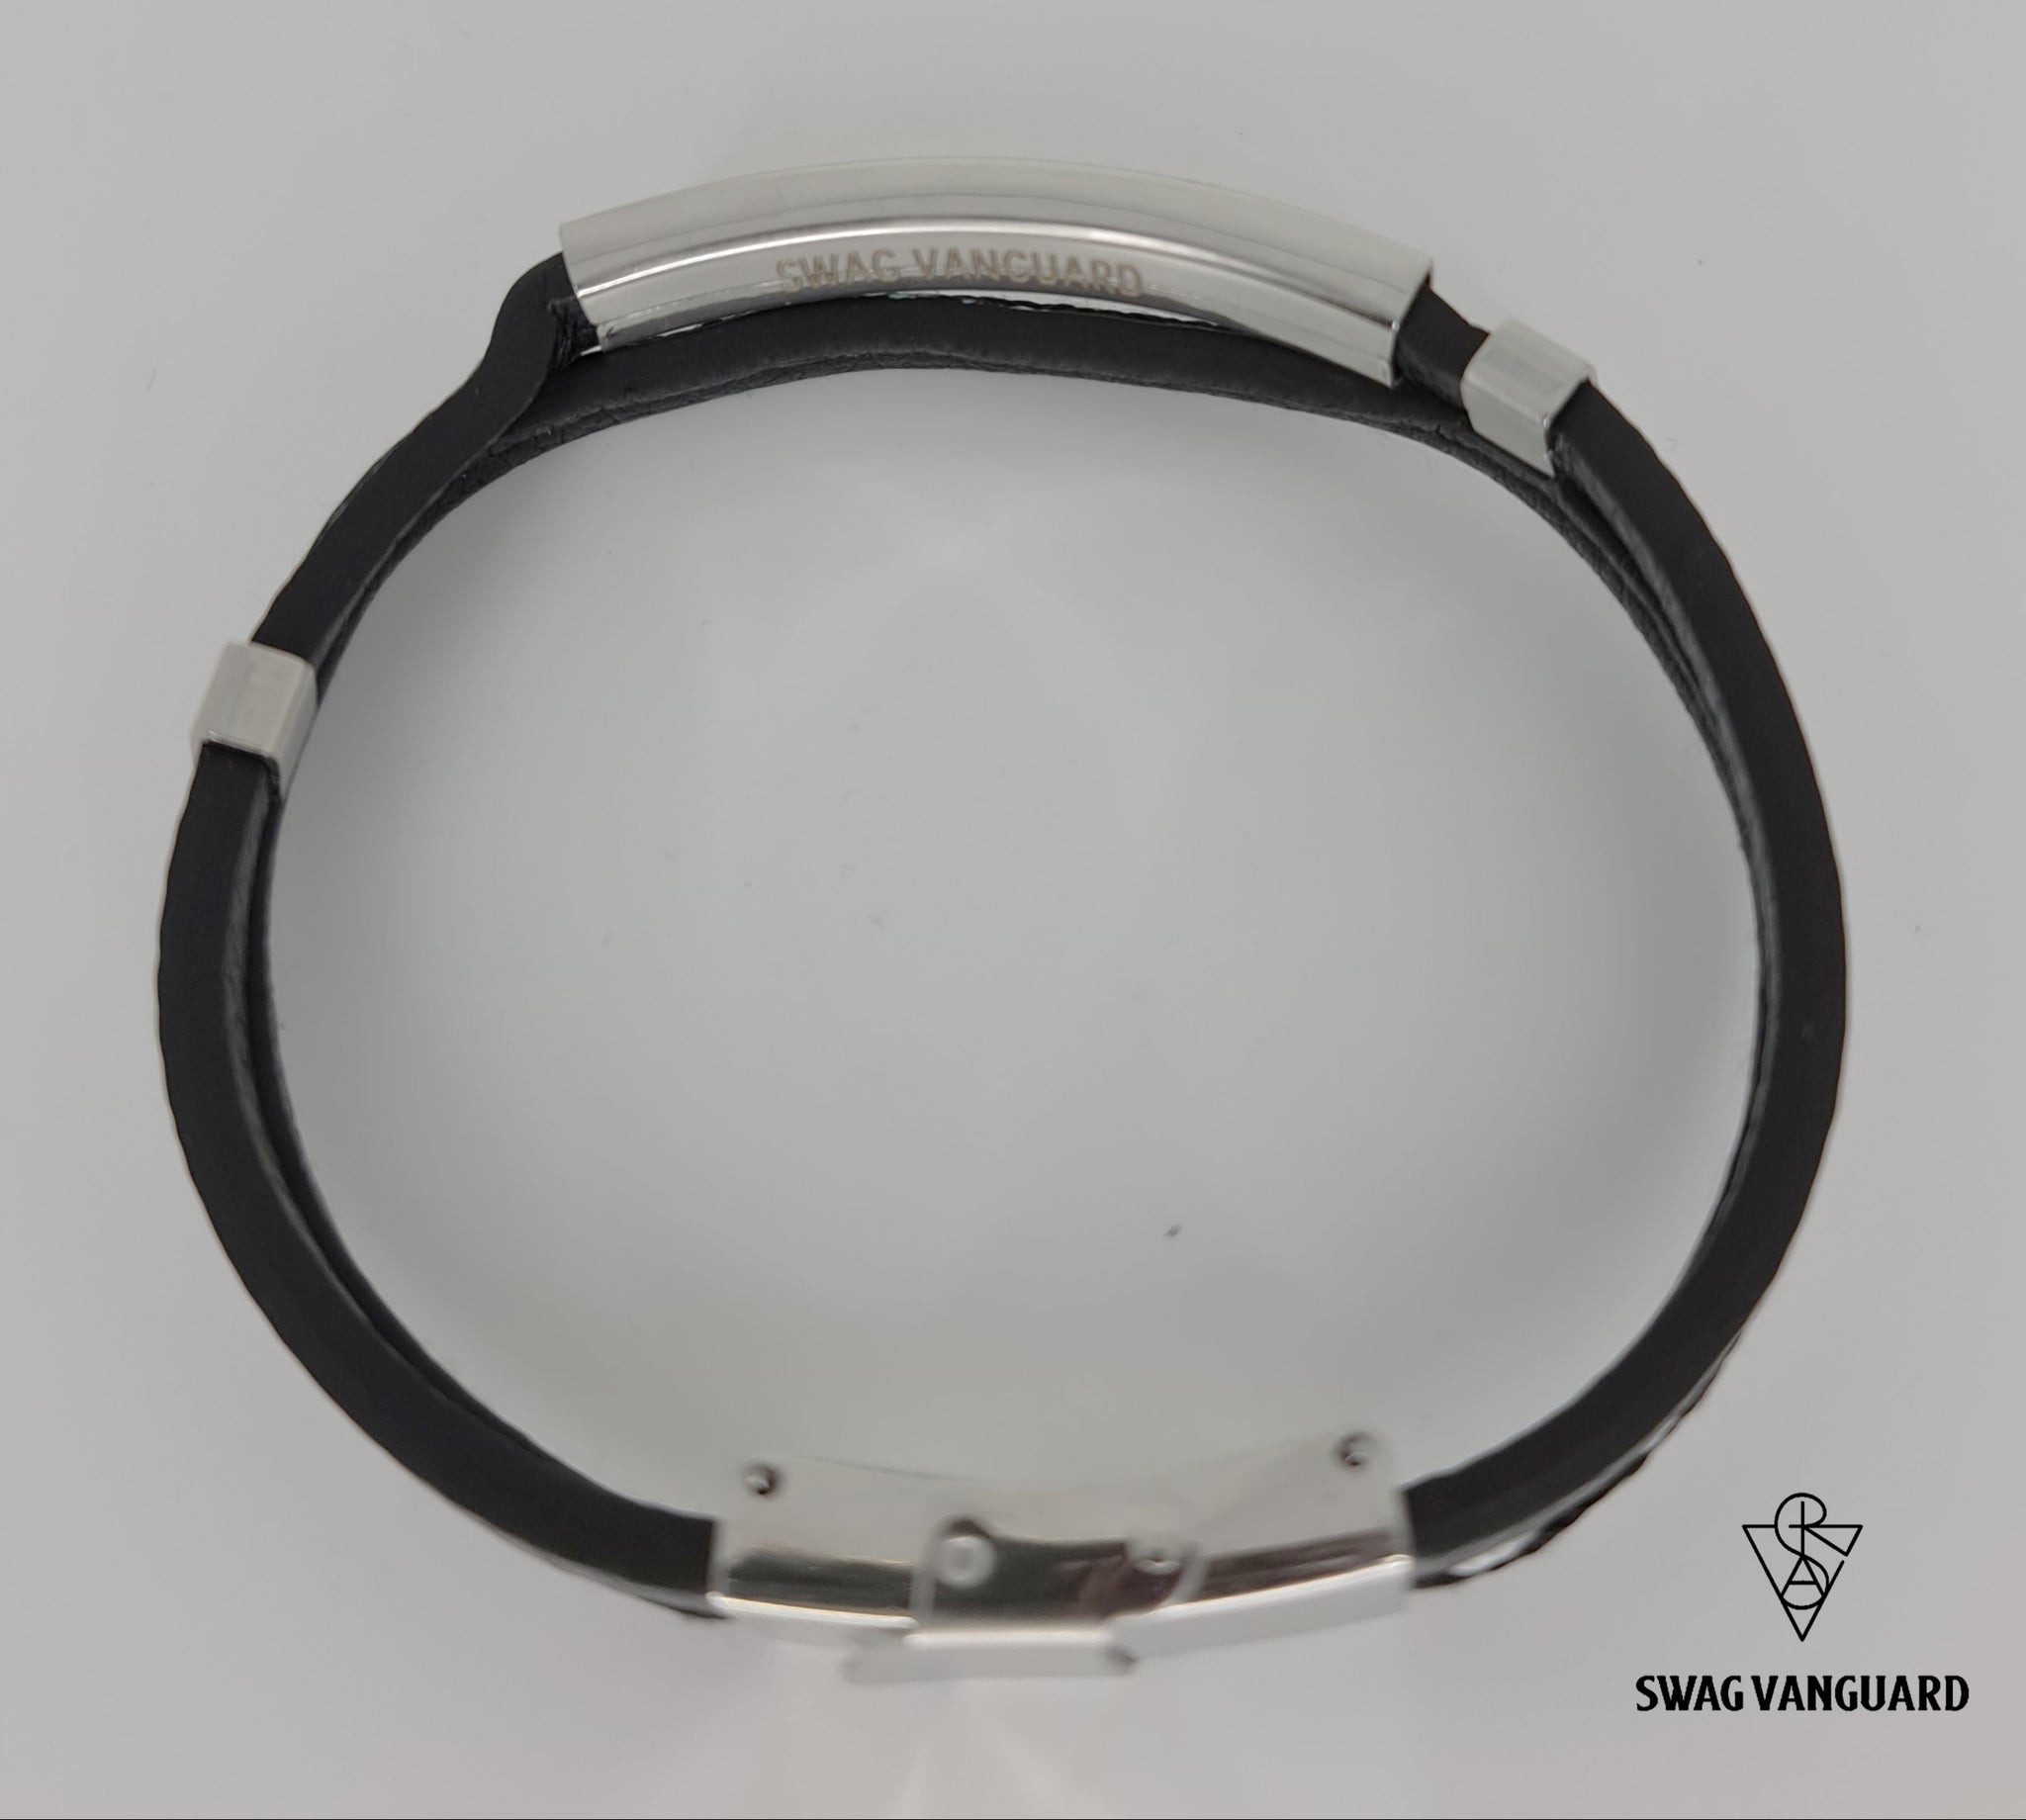 Stainless Steel Plate with Black Calf Leather Interlaced with White and Black Stitching